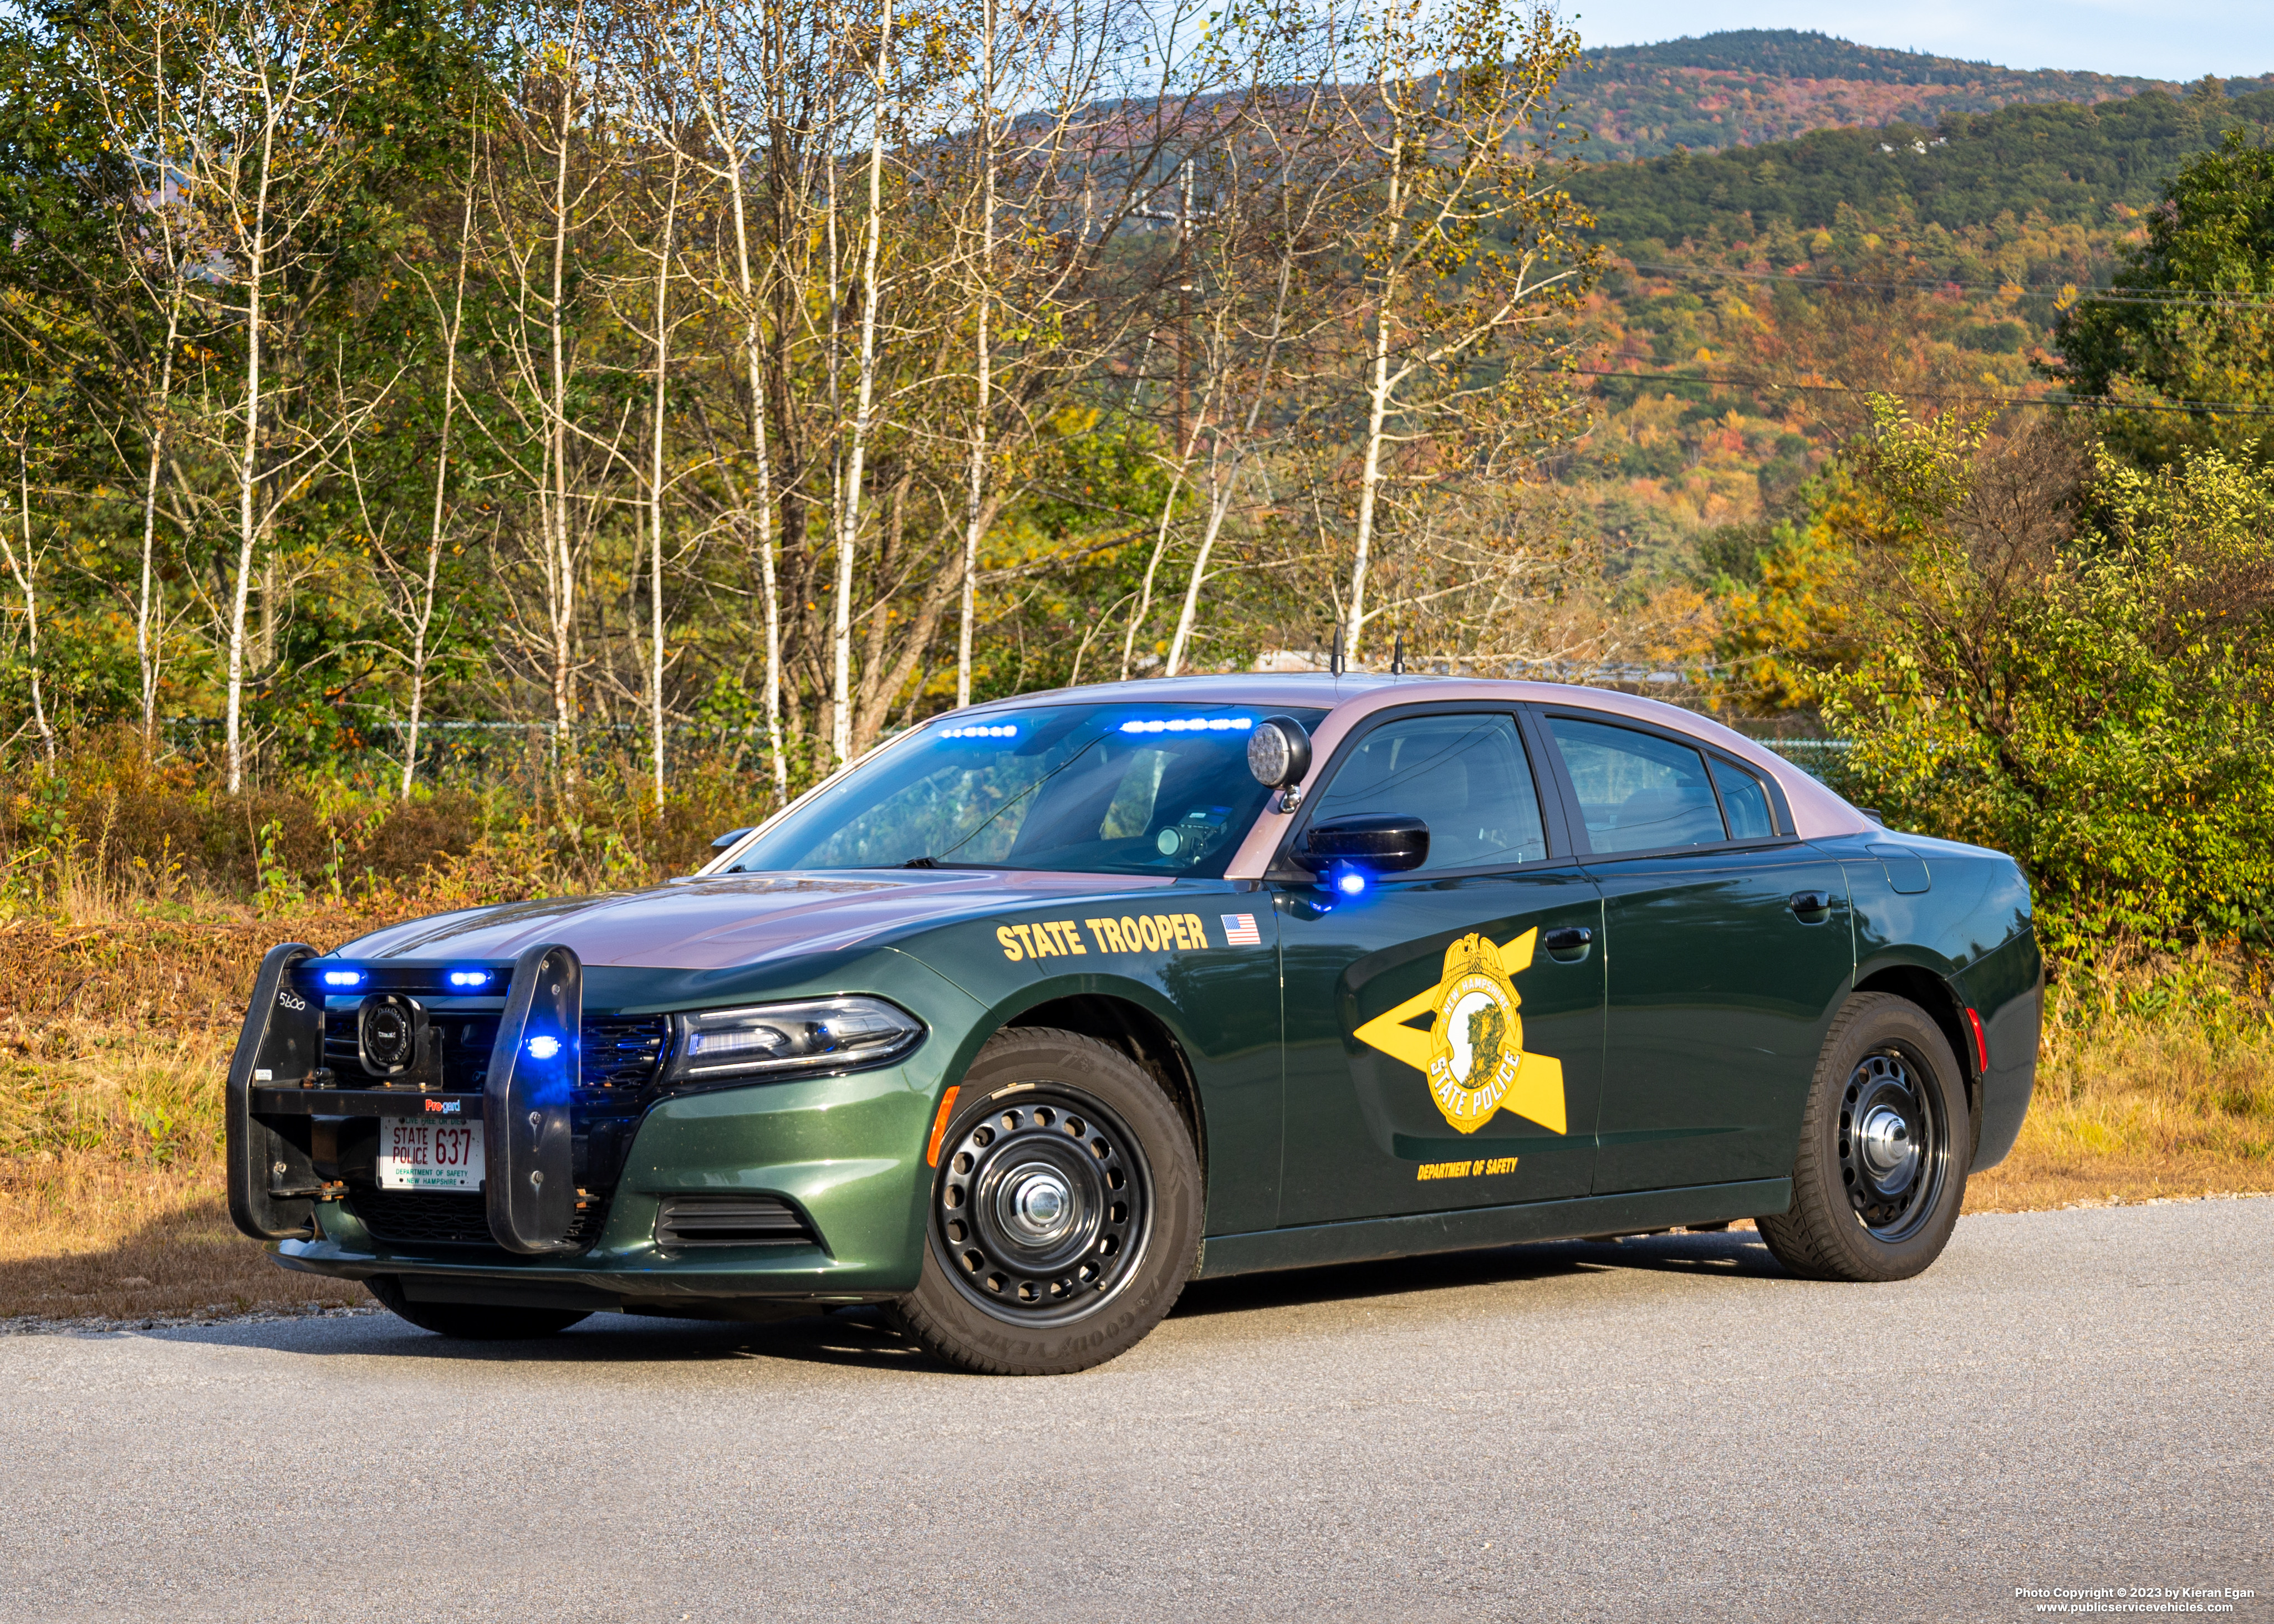 A photo  of New Hampshire State Police
            Cruiser 637, a 2021 Dodge Charger             taken by Kieran Egan